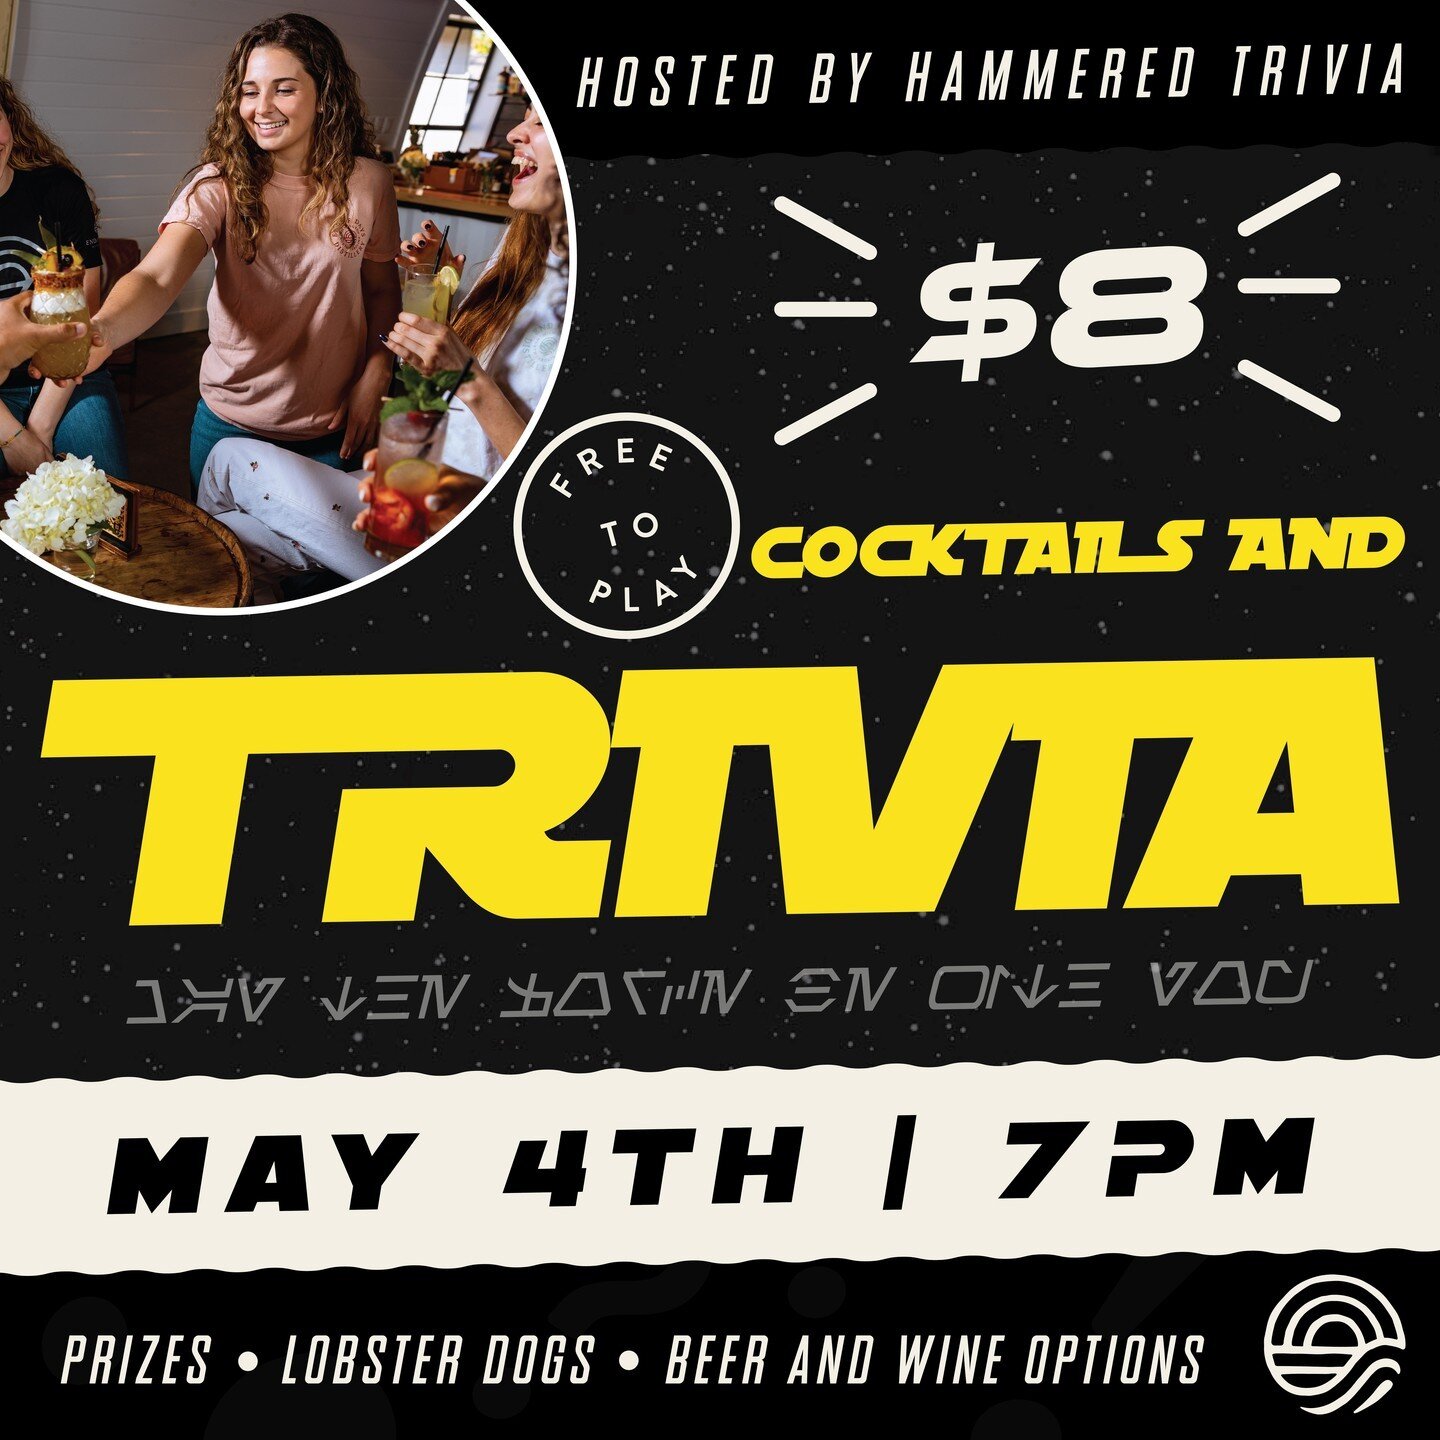 The force is strong with this trivia!⁣⁠
⁣⁠
Join us for 𝐂𝐨𝐜𝐤𝐭𝐚𝐢𝐥𝐬 𝐀𝐧𝐝 𝐓𝐫𝐢𝐯𝐢𝐚!⁣⁠⁣⁠⁣⁠⁣⁠⁣⁠
𝐌𝐚𝐲 𝟒𝐭𝐡 𝐚𝐭 𝟕𝐩𝐦⁣⁠⁣⁠⁣⁠
⁣⁠⁣⁠⁣⁠⁣⁠⁣⁠
To celebrate the legendary Star Wars saga on May The Force Be With You Day, we've got an extra special